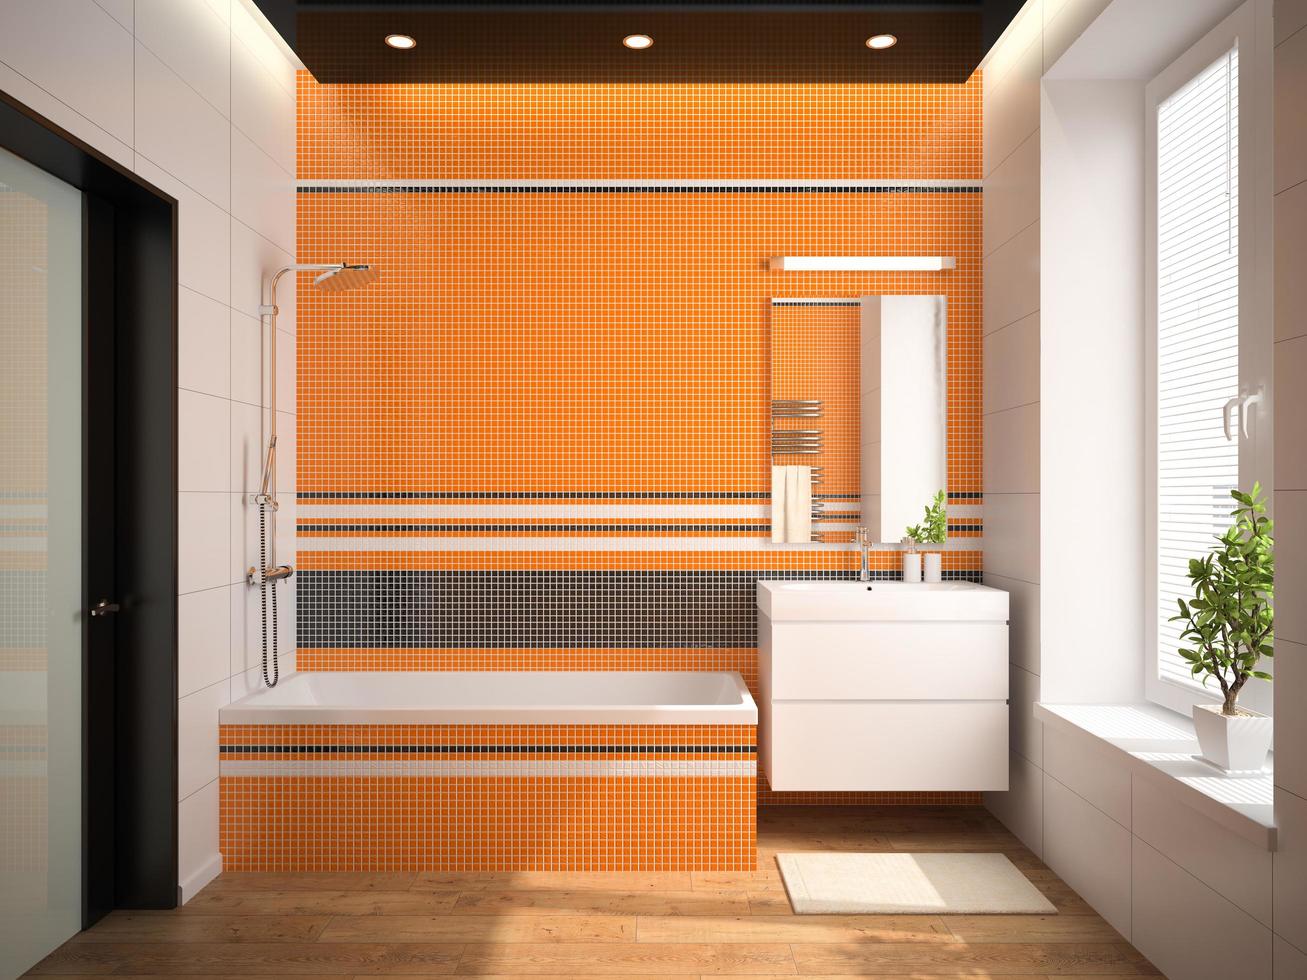 Interior of a bathroom with orange walls in 3D rendering photo